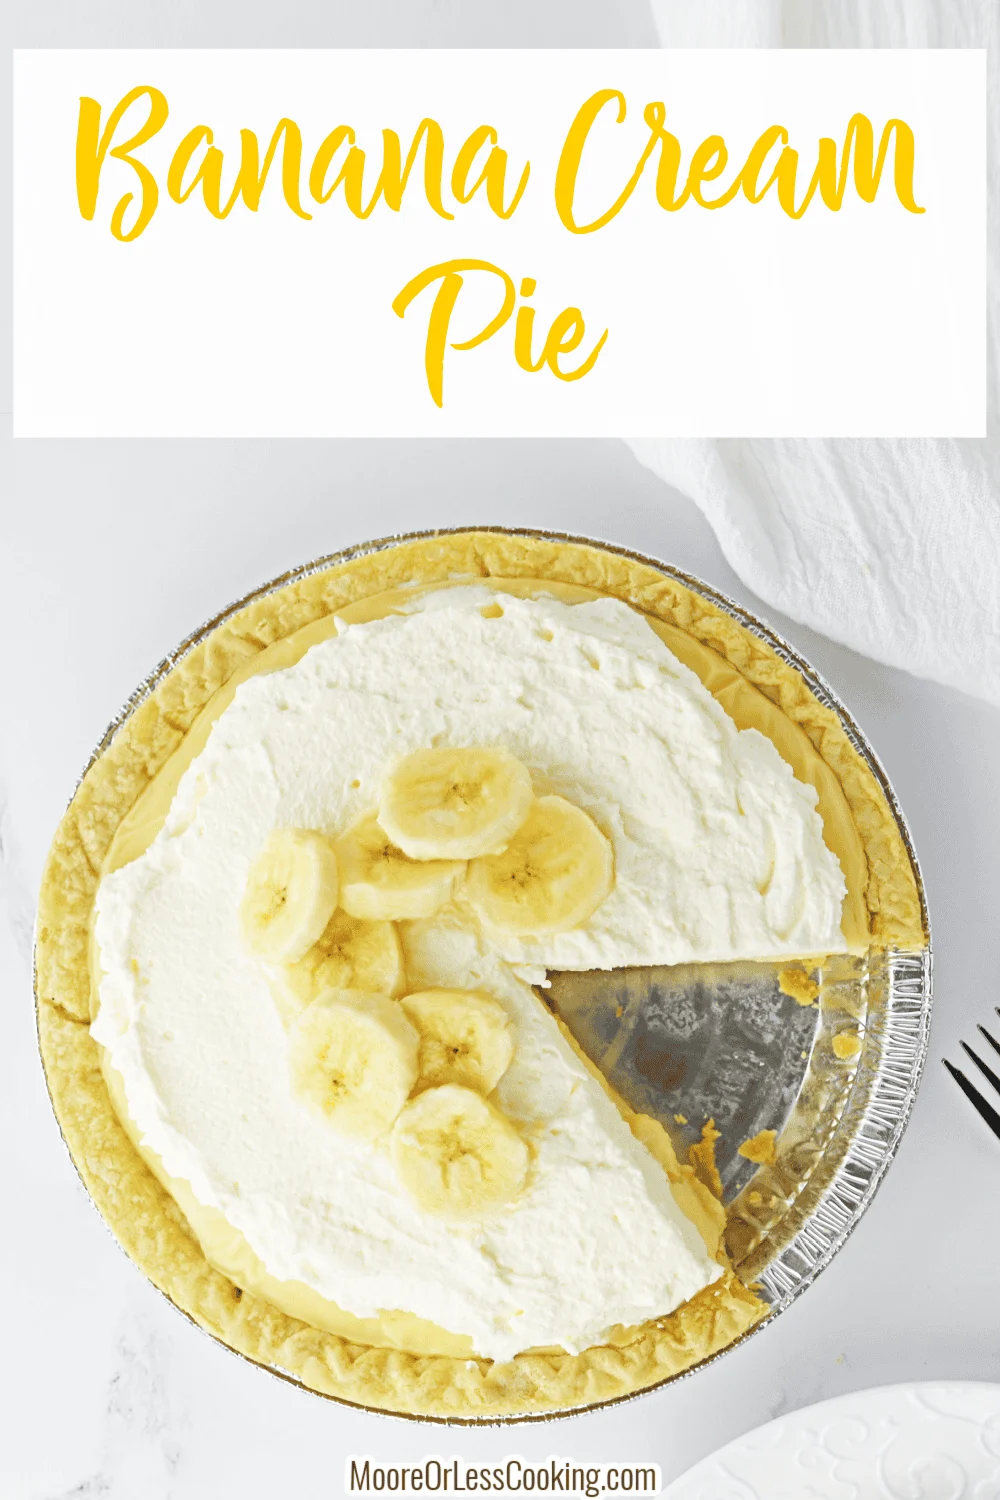 Your family will love this easy Banana Cream Pie with a made-from-scratch custard that is absolutely scrumptious! The pie crust holds a mound of ripe banana slices topped with a creamy and sweet vanilla custard. Crown it with a generous topping of whipped cream and more banana slices and serve this chilled dessert to rave reviews! via @Mooreorlesscook